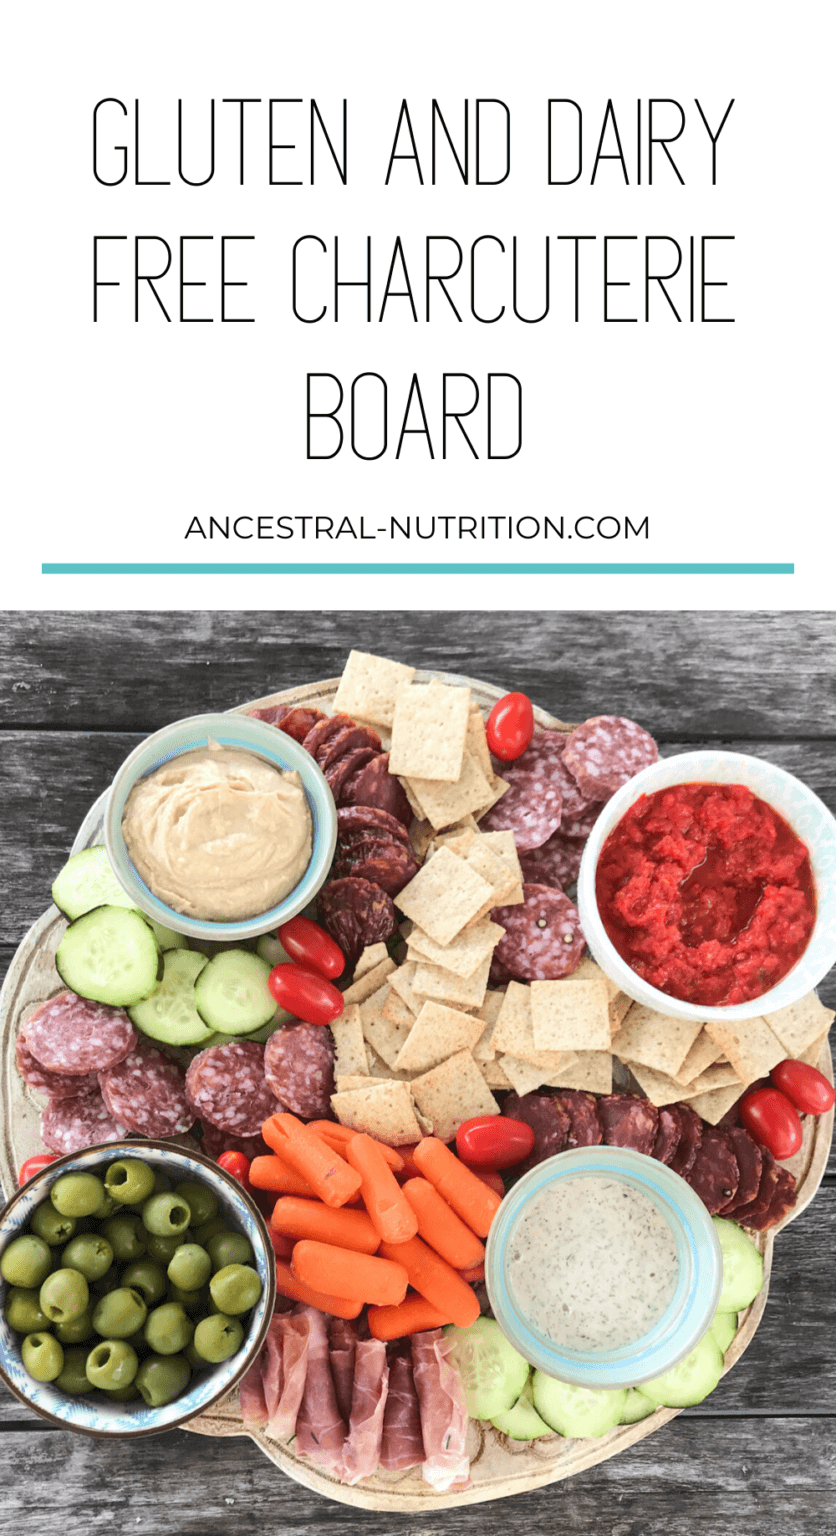 Gluten and Dairy Free Charcuterie Board - Ancestral Nutrition